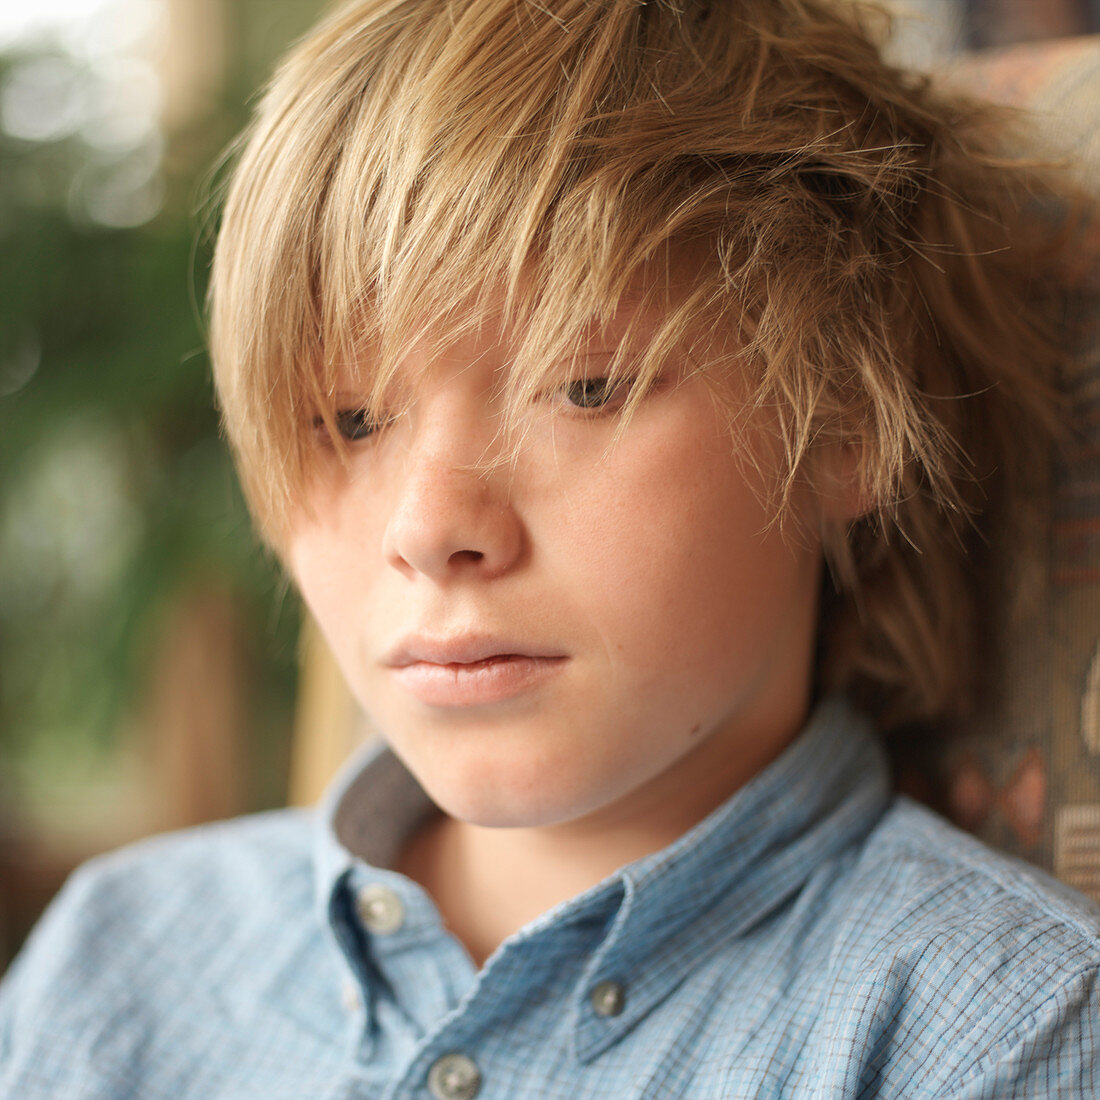 Portrait of tween boy with messy hair